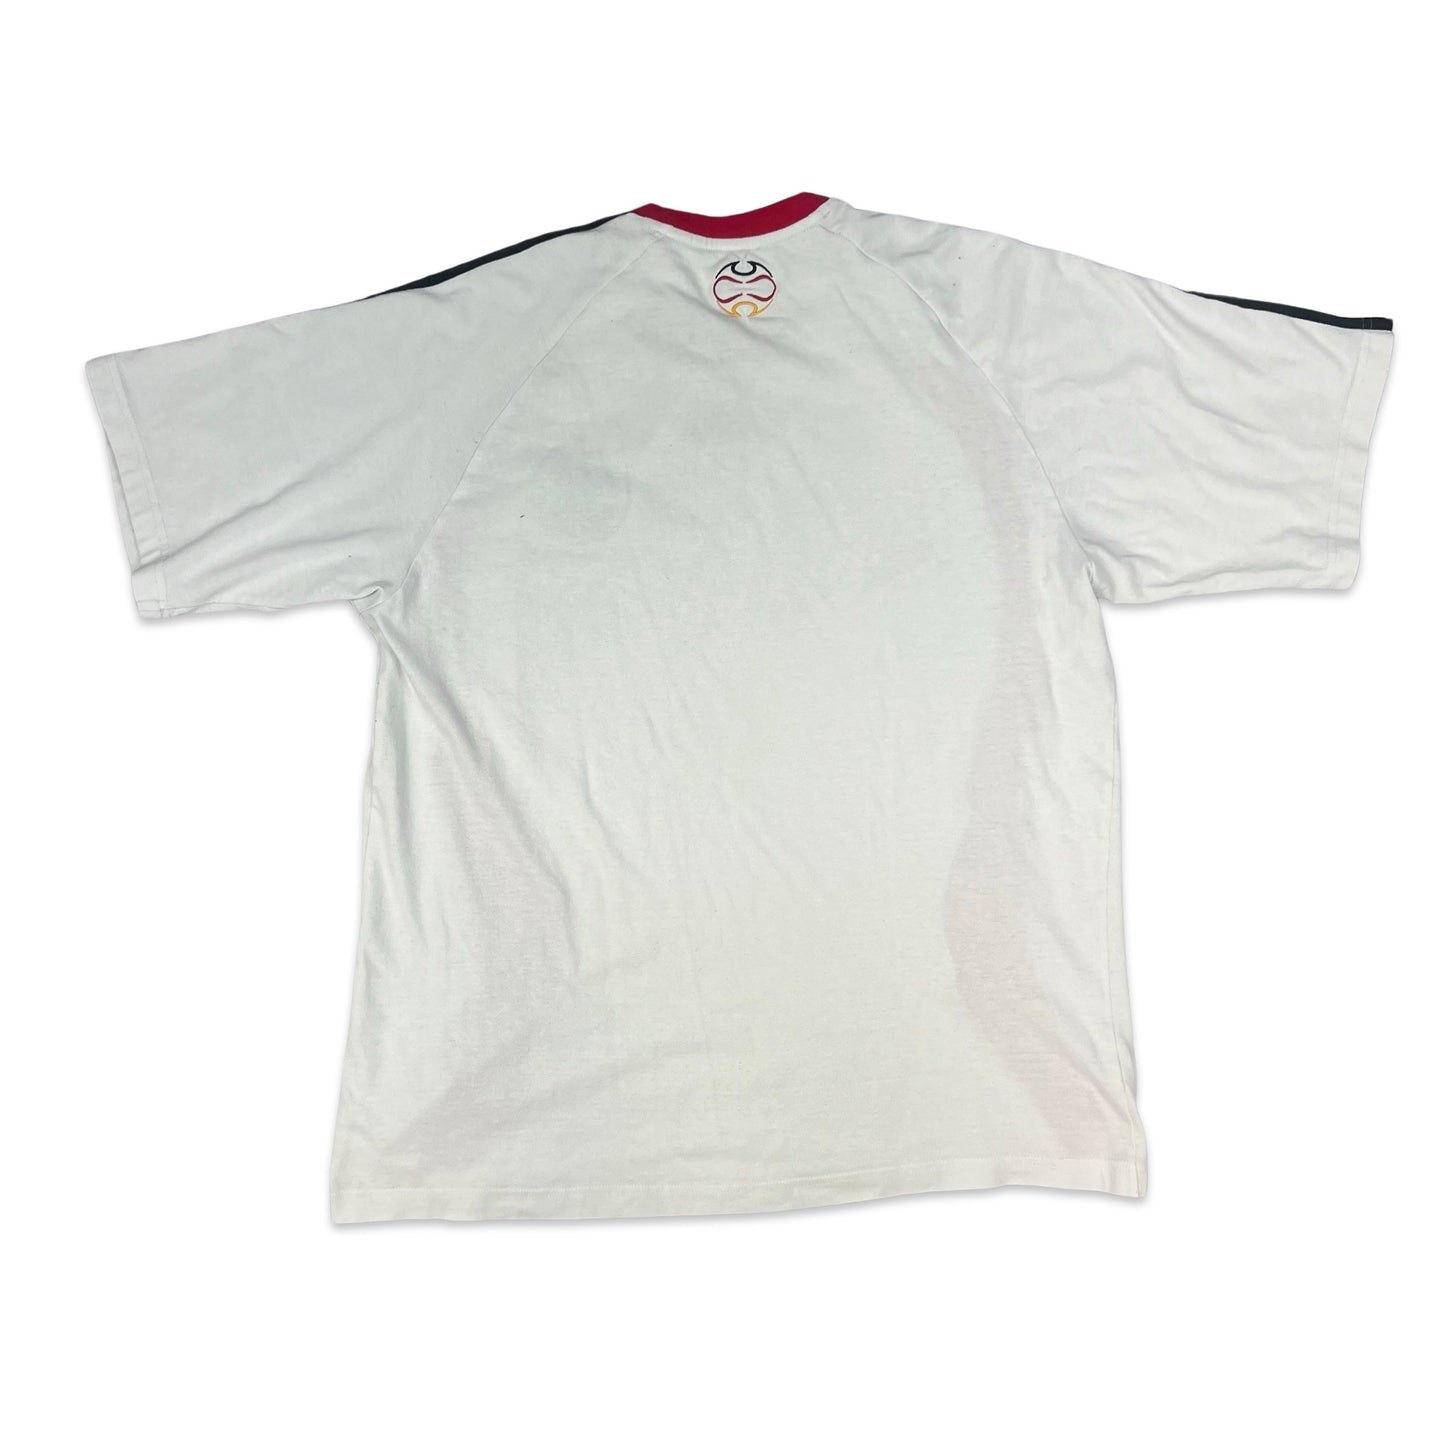 Adidas Germany Football White & Red Tee M L